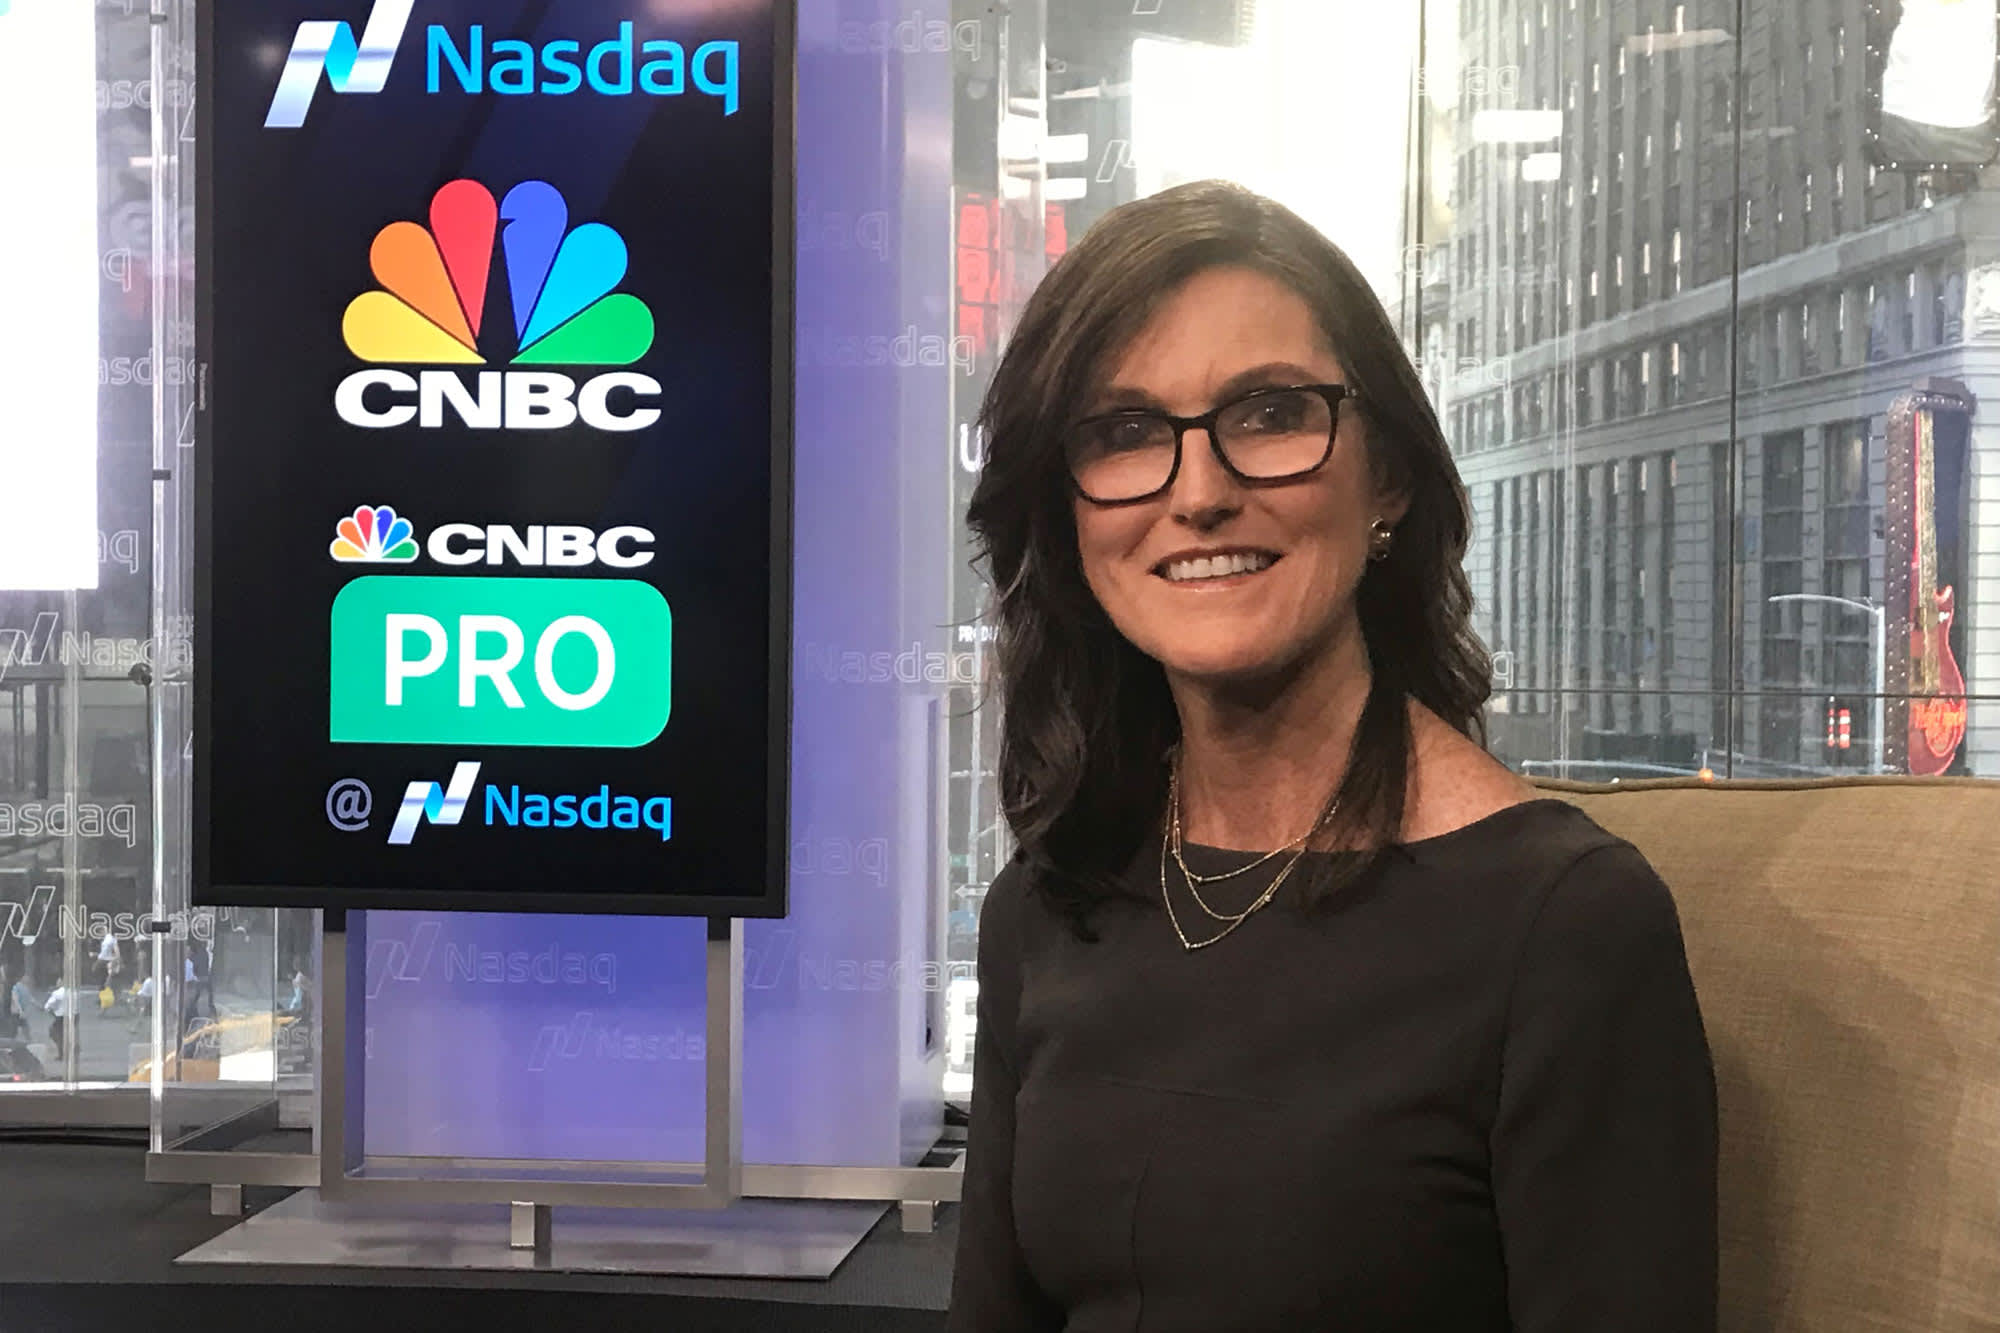 Cathie Wood says the underlying bull market is strengthening and she is finding big buying opportunities in the liquidation